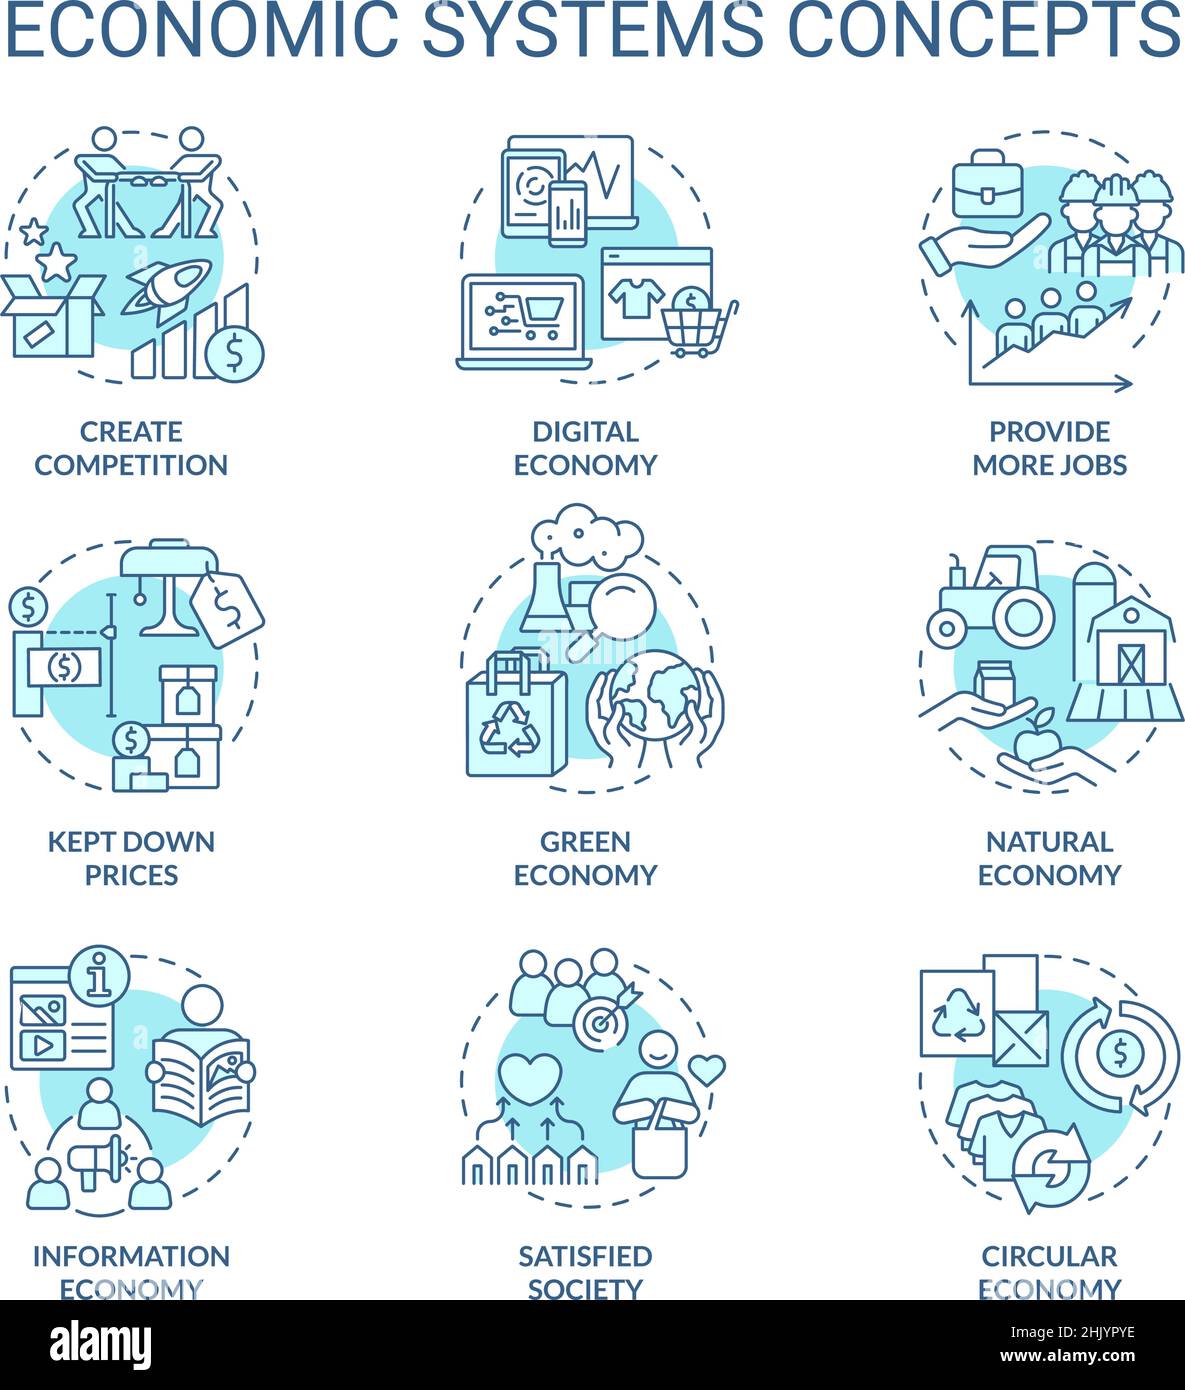 Economic systems turquoise concept icons set Stock Vector